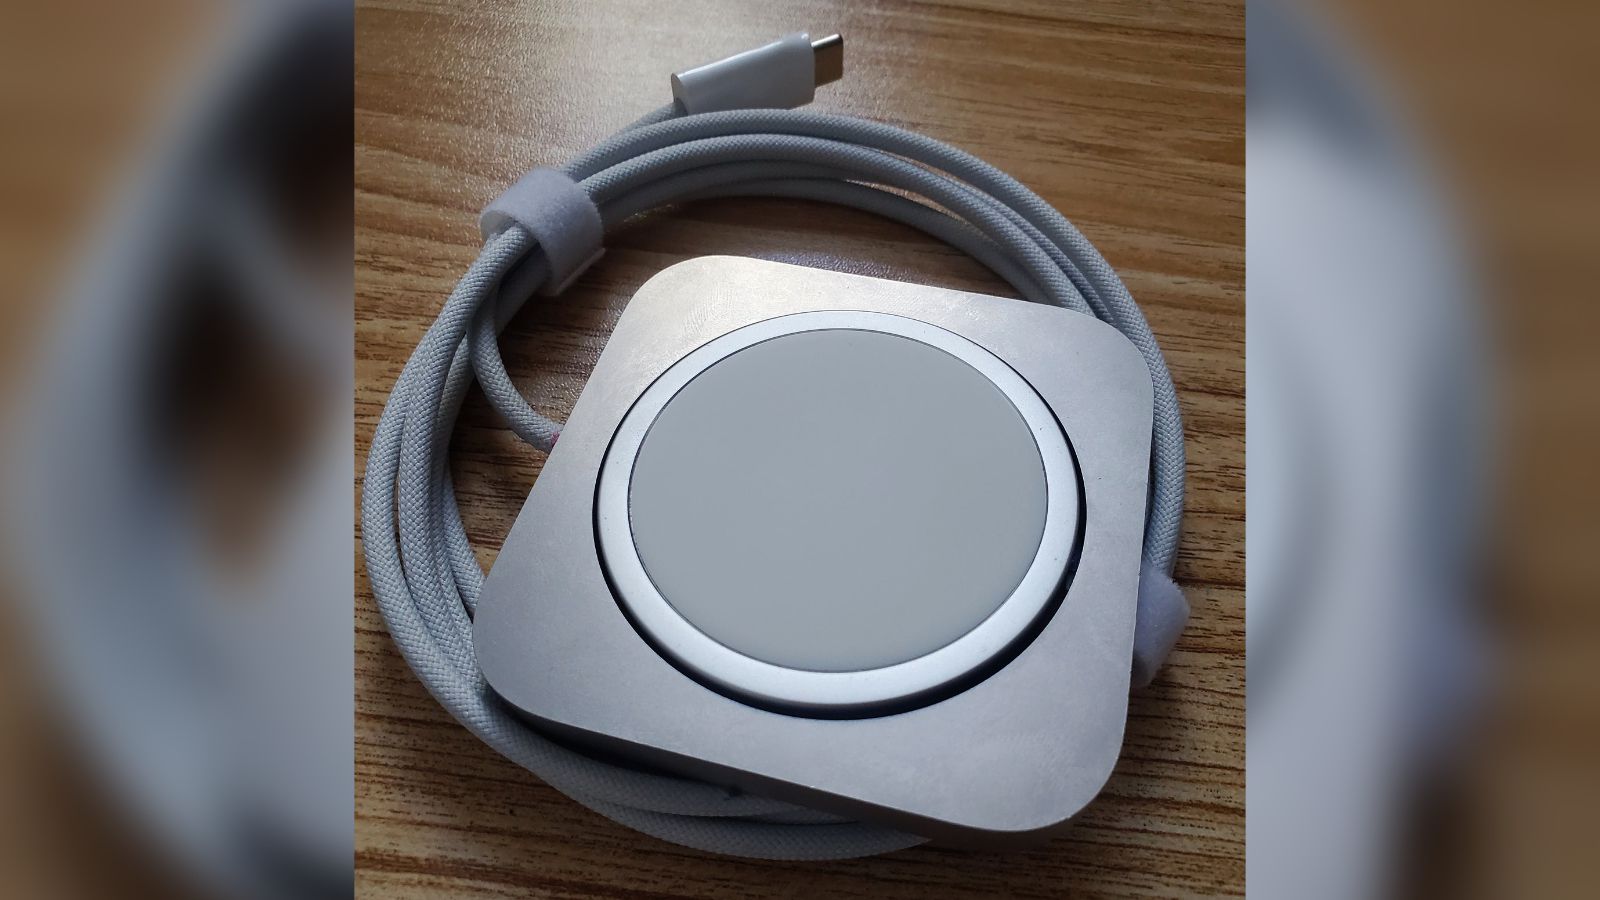 Images of Unreleased 'Apple Magic Charger' Surface Online - macrumors.com